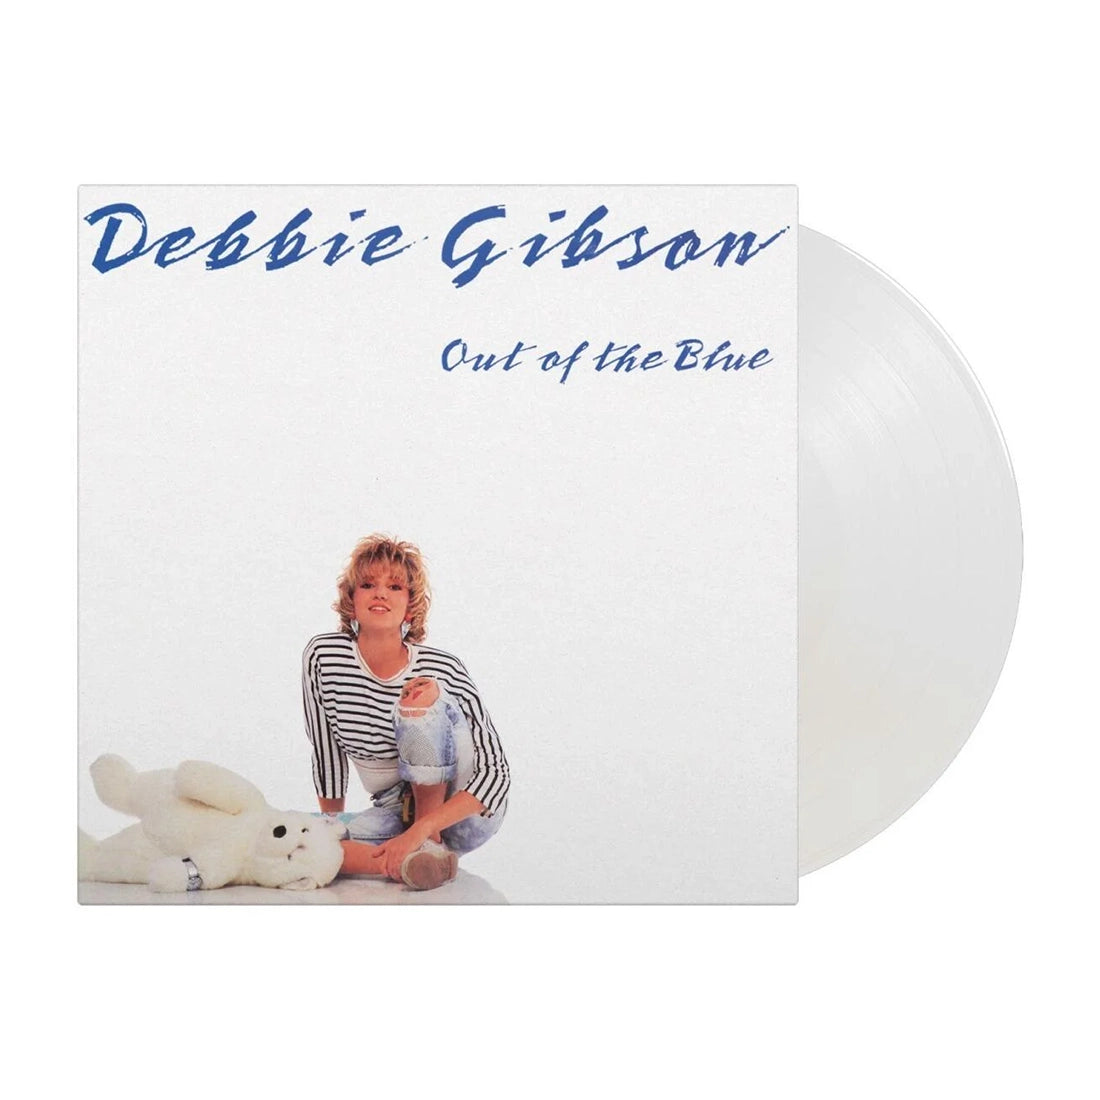 Debbie Gibson - Out Of The Blue: Limited White Vinyl LP